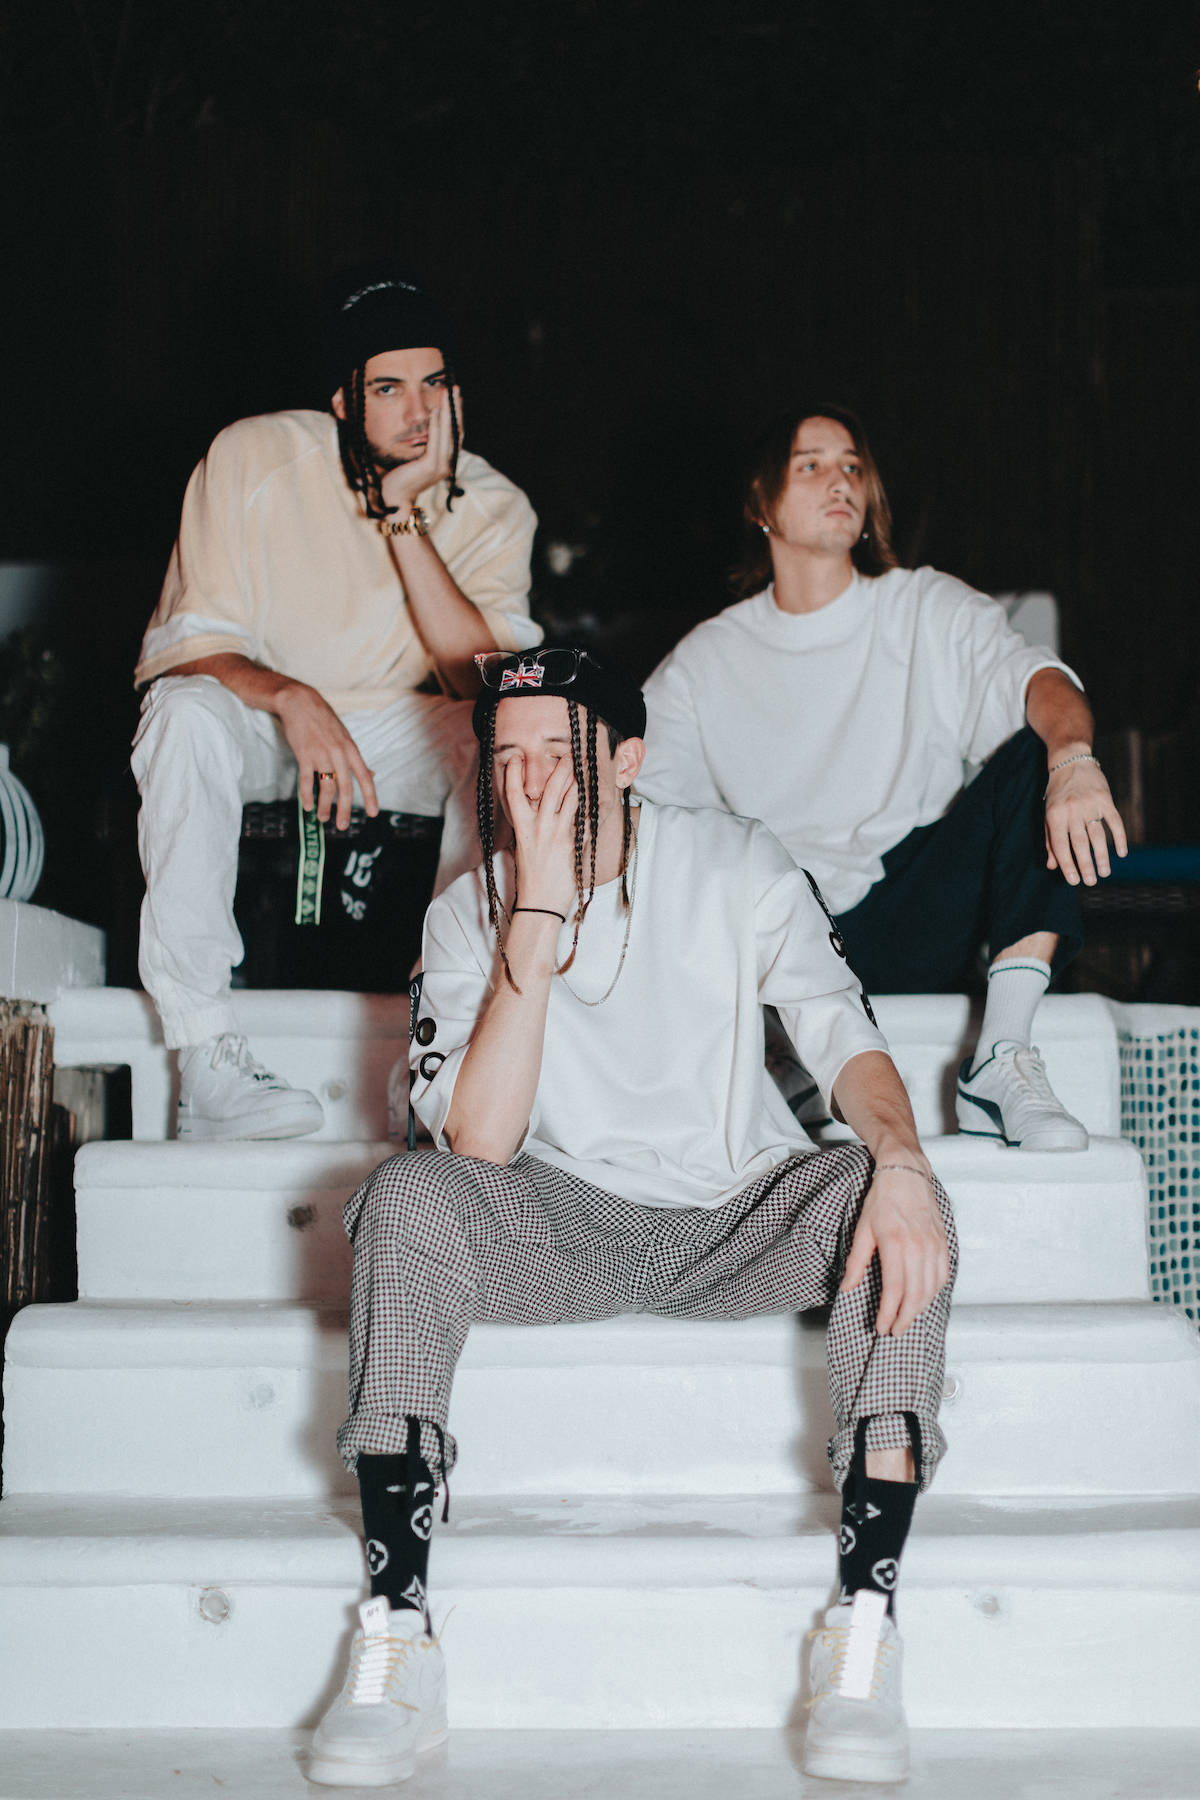 Chase Atlantic brings passion-infused music to life Wallpaper